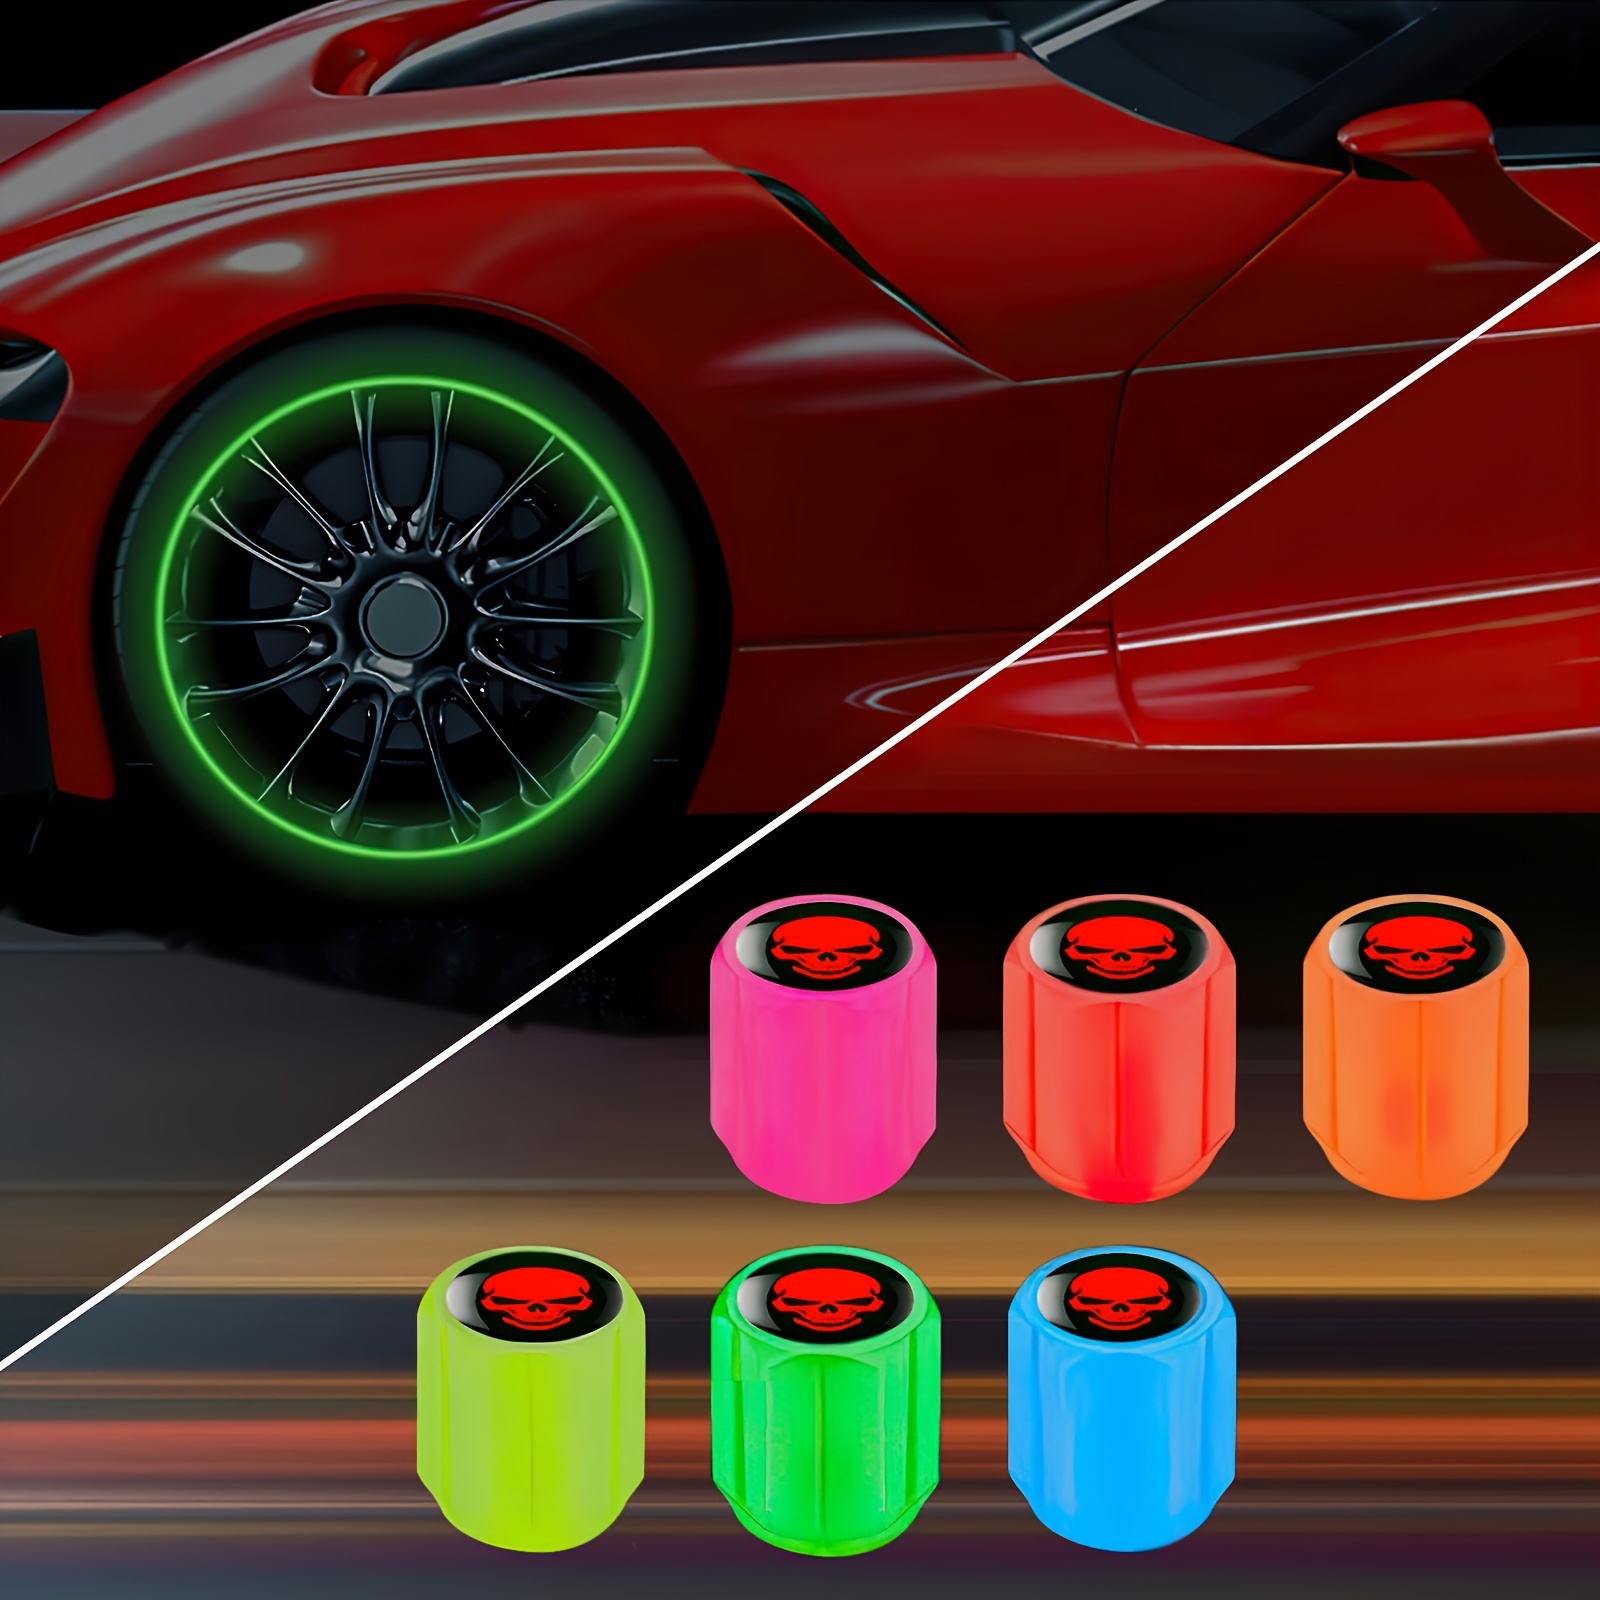 

10-piece Fluorescent Tire Valve Stem Caps - Hexagon Shaped, Corrosion-resistant Wheel Covers For Cars, Motorcycles & Suvs